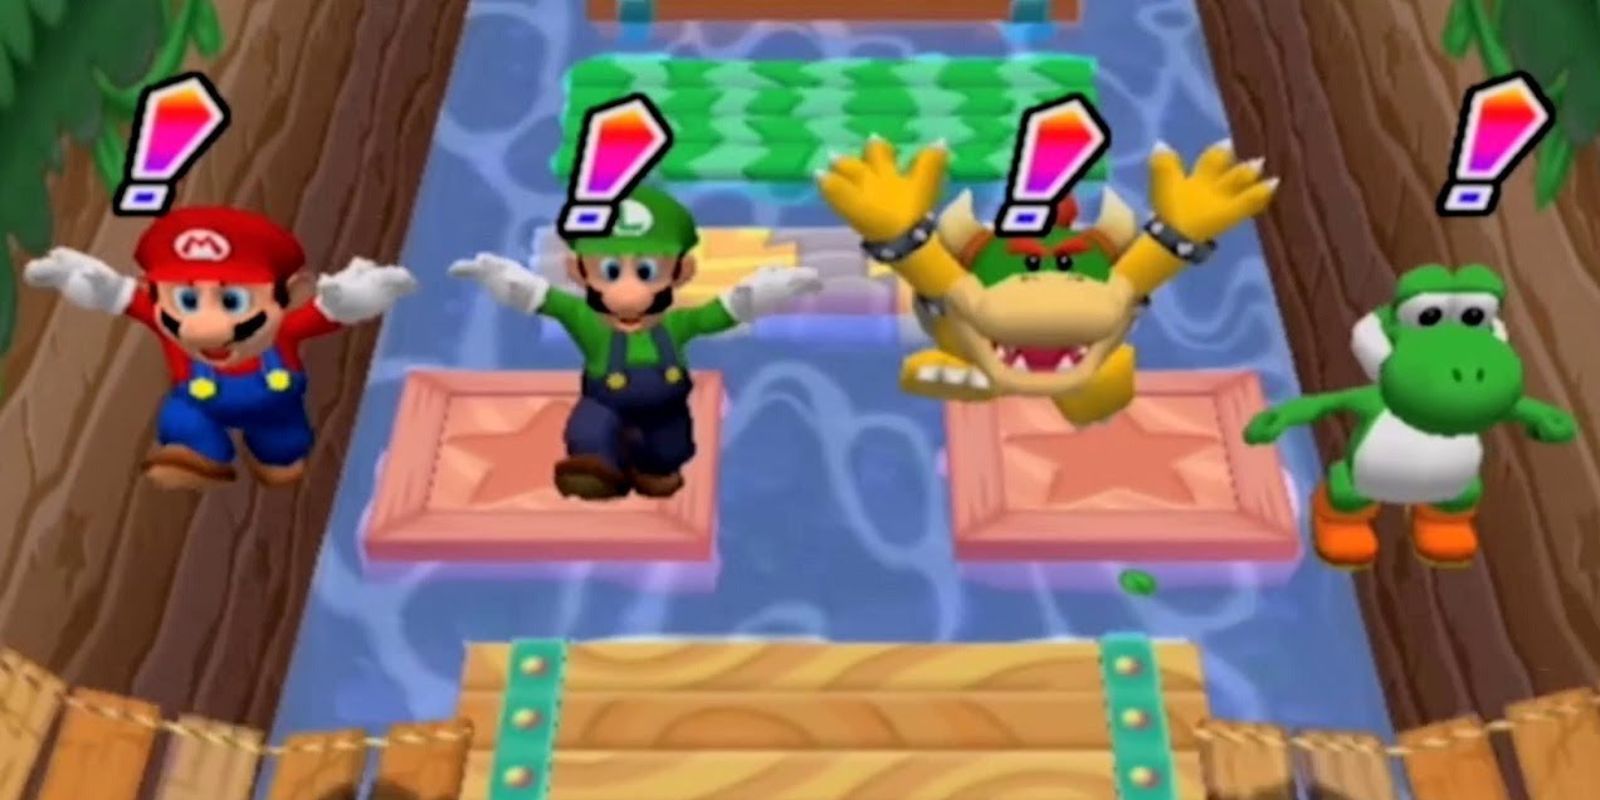 What The Best Mario Party Game Is